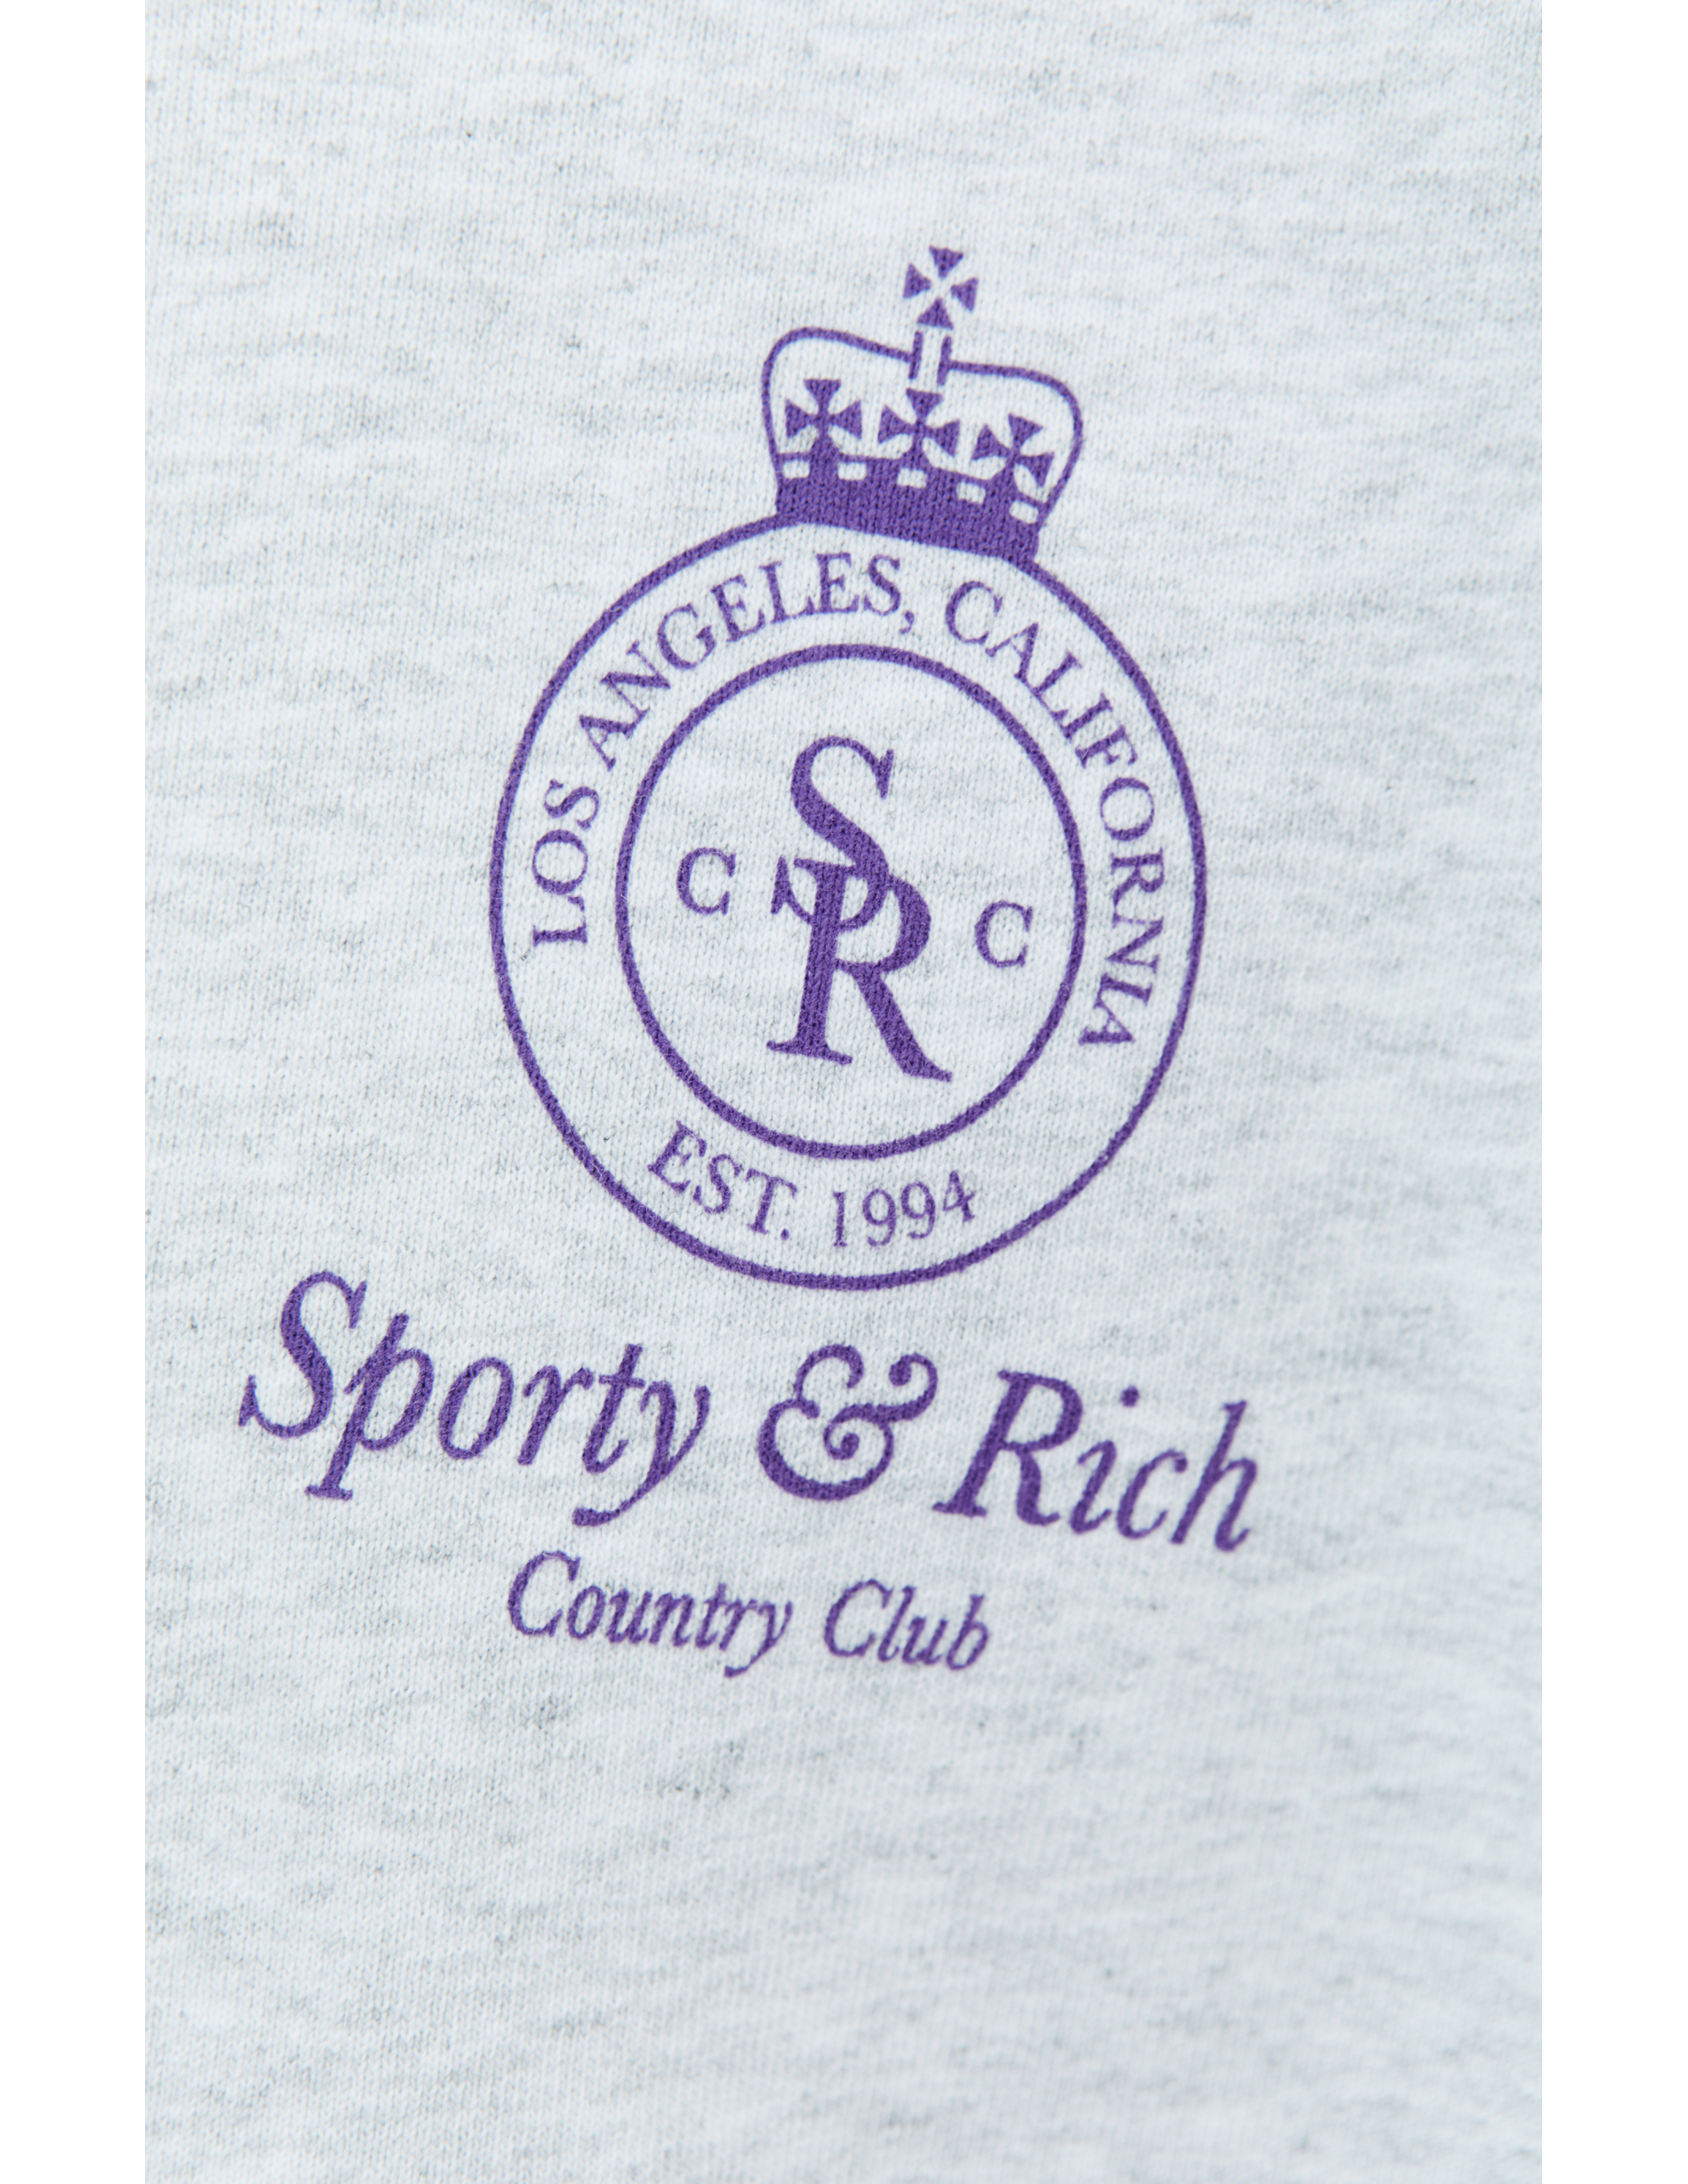 Sporty and Rich. Sporty and Rich логотип. Sporty and Rich купить. The small Sports Club. Sport me club